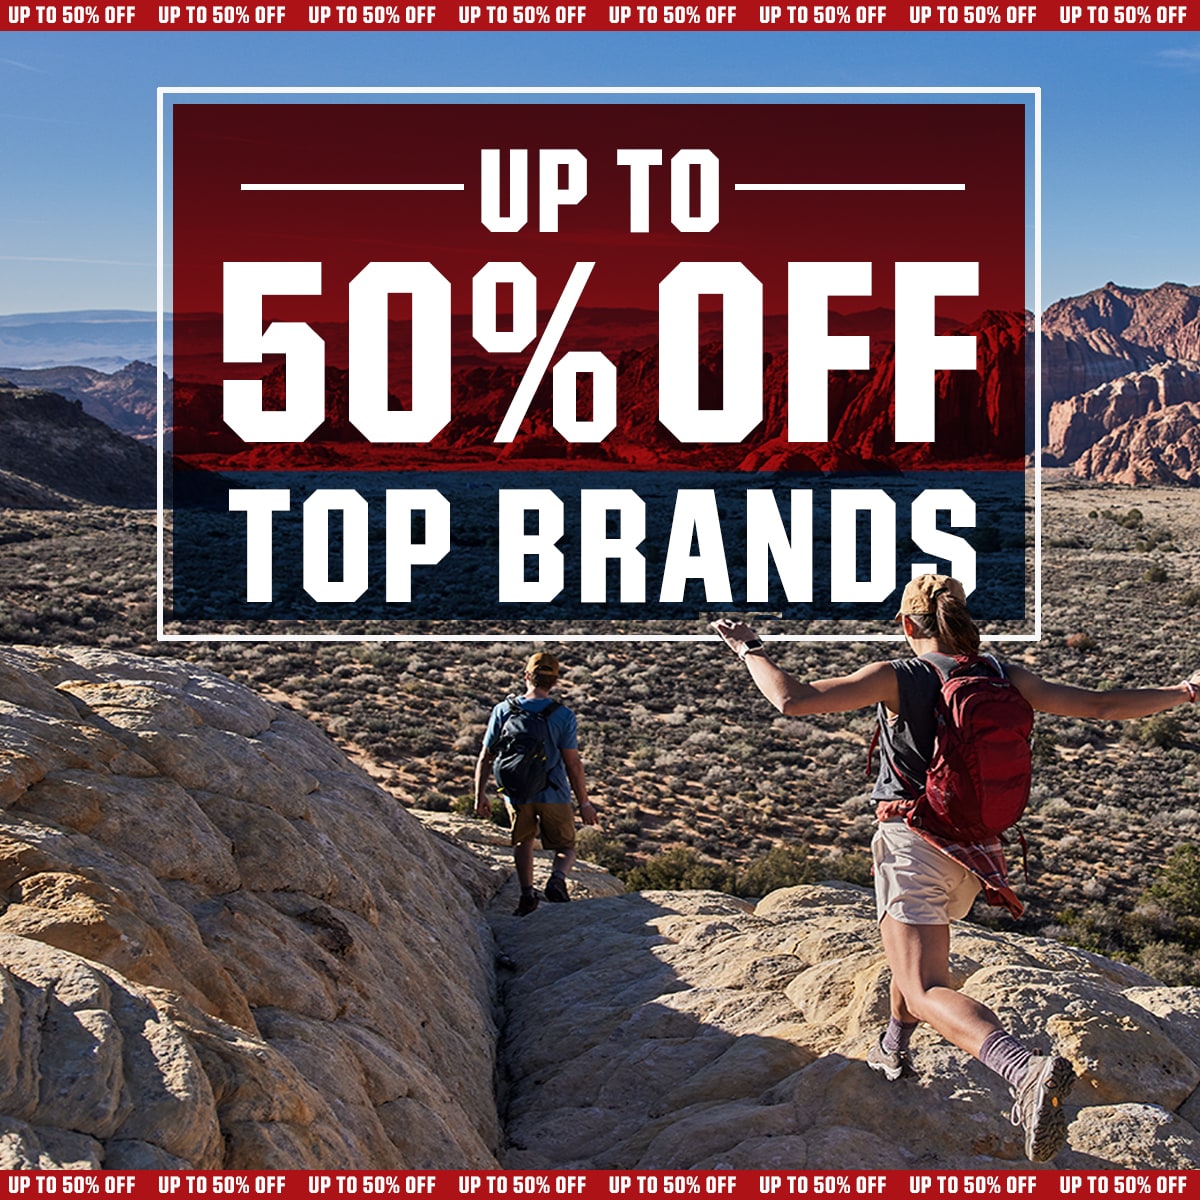 Up to 50% off top brands.